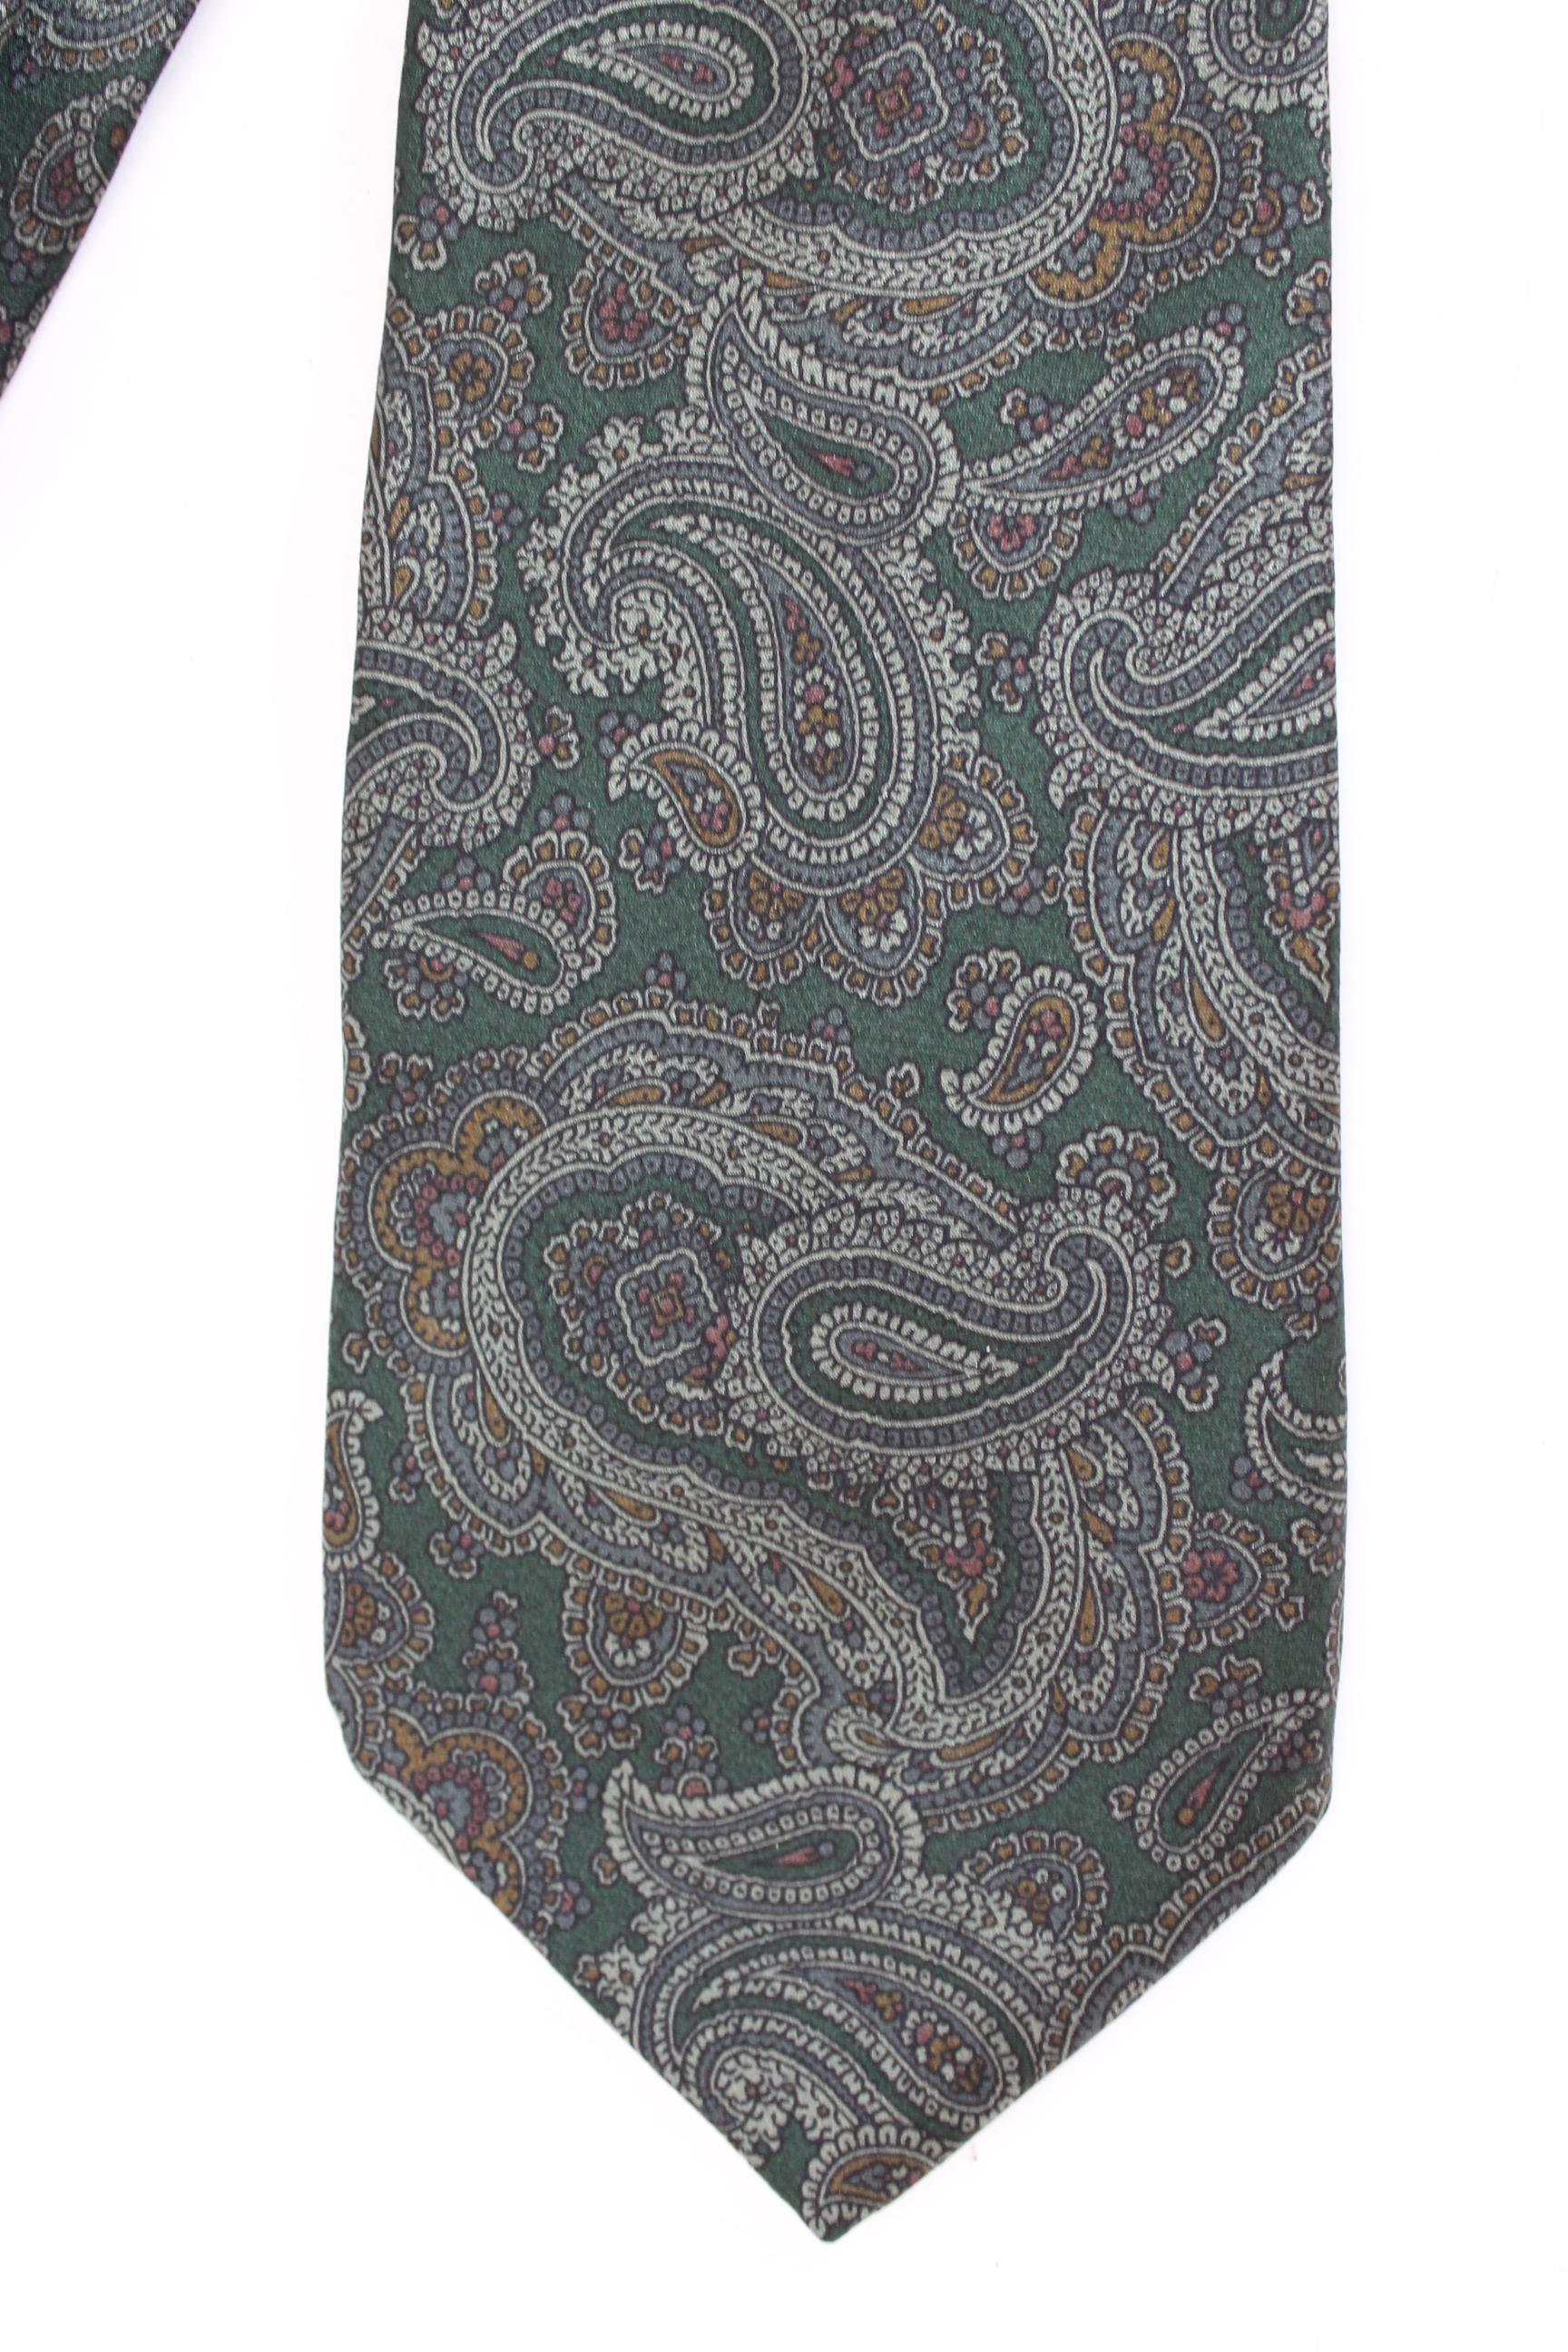 Giorgio Armani 90s vintage elegant tie. Gray color with paisley patterns. 100% silk. Wide model on the tip. Made in Italy. Excellent vintage conditions.

Length: 146 cm

Width: 9 cm